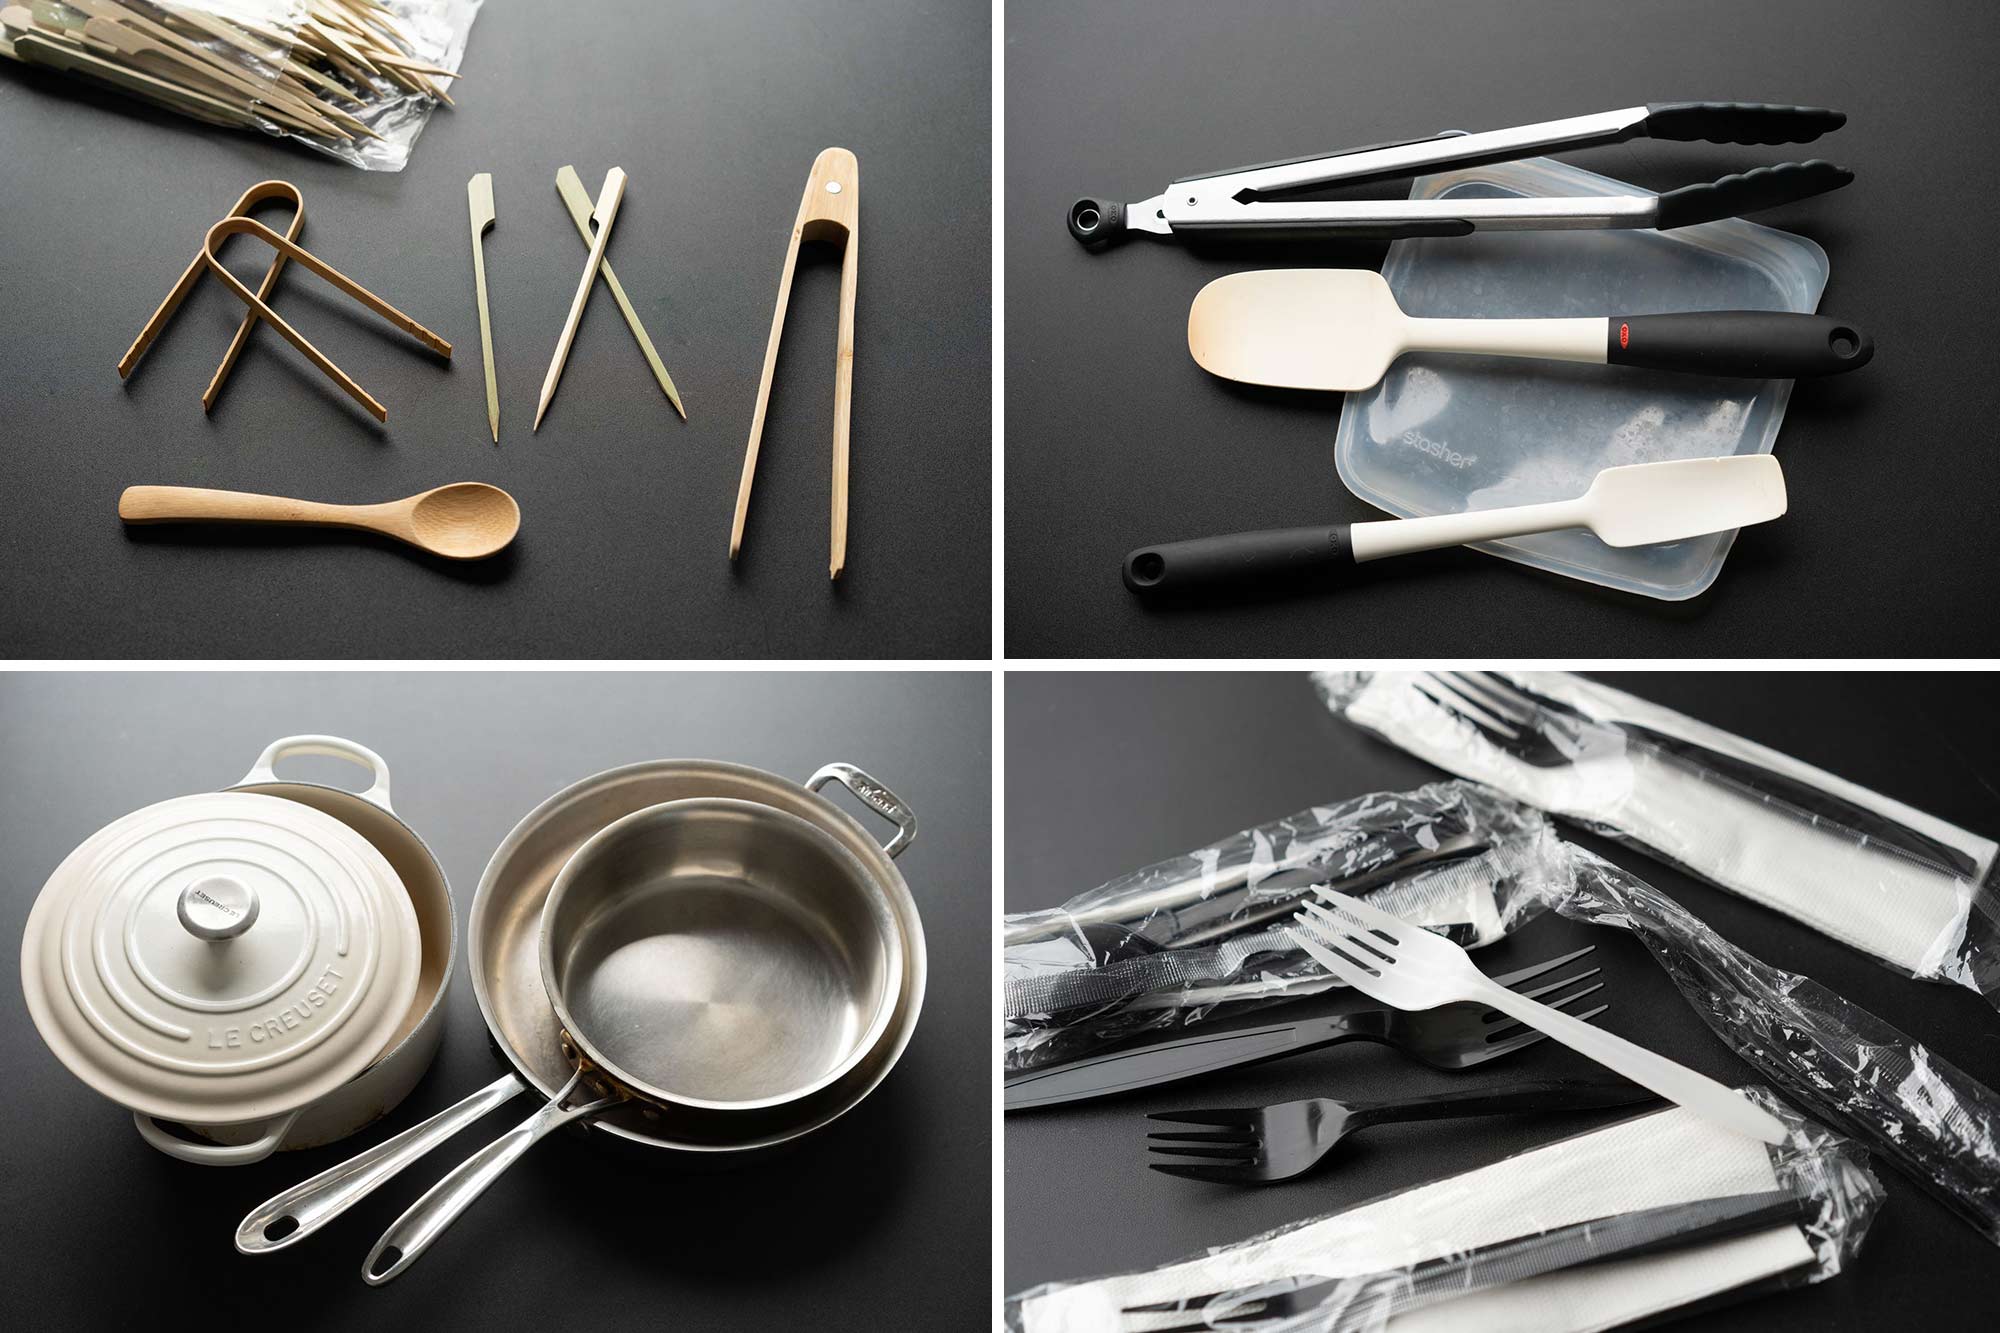 13 Safest, Non-Toxic Cooking Utensils For Your Kitchen - Hungry Huy